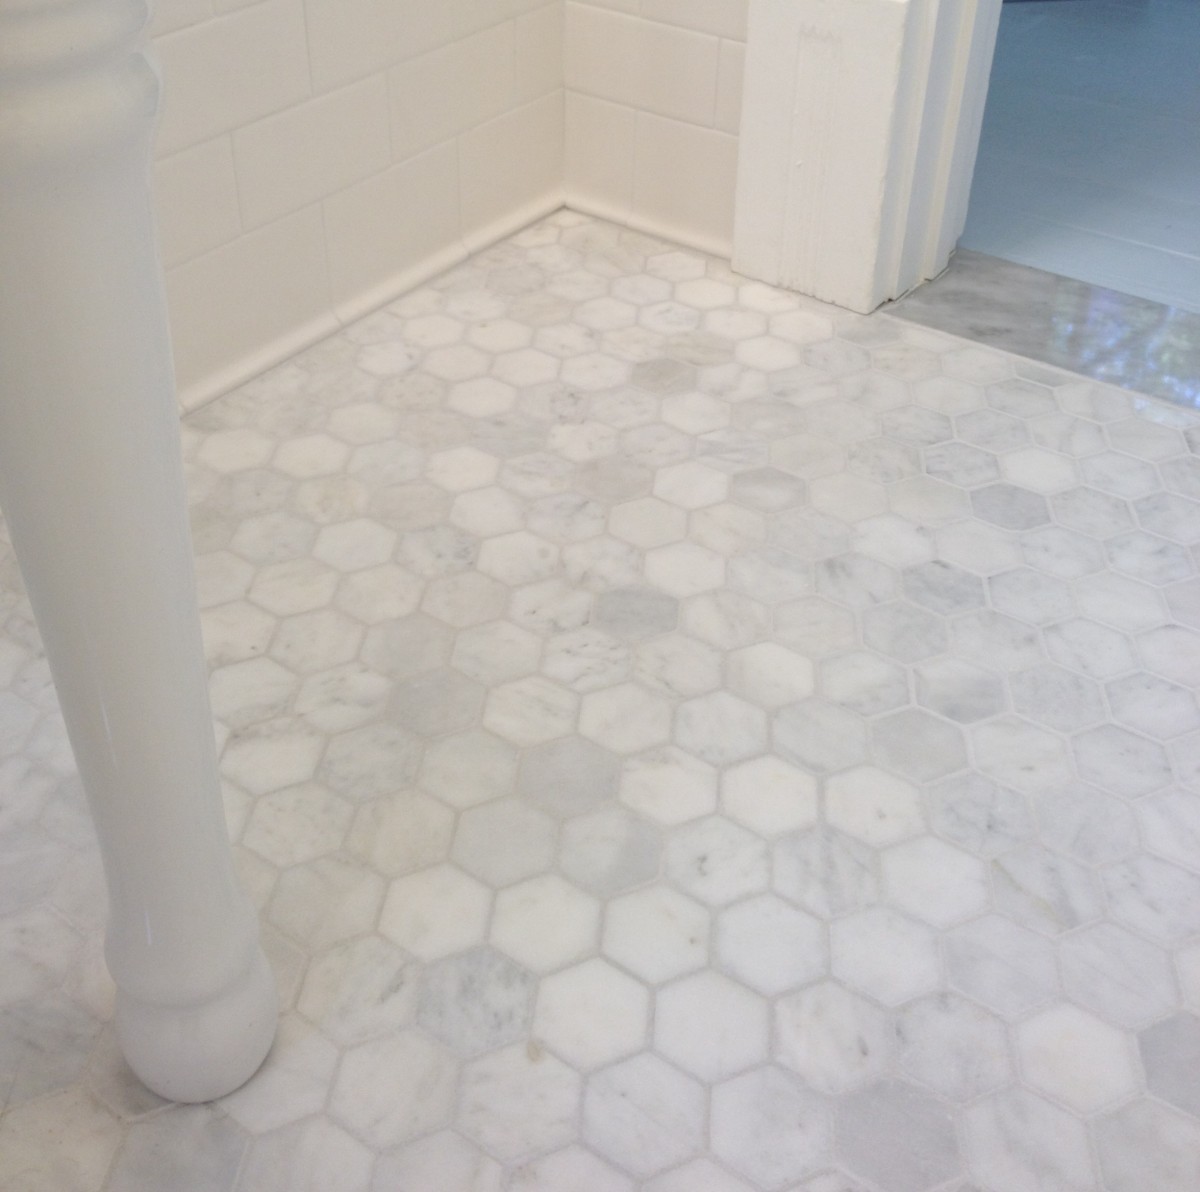 tiles-hexagon-feature-gloss-high-designs-online-price-mosaic-with-shops-tile-quartz-large-patterned-pebble-a-leave-lasting-impressions-for-bathroom-floor-tile-ideas-1200x1192